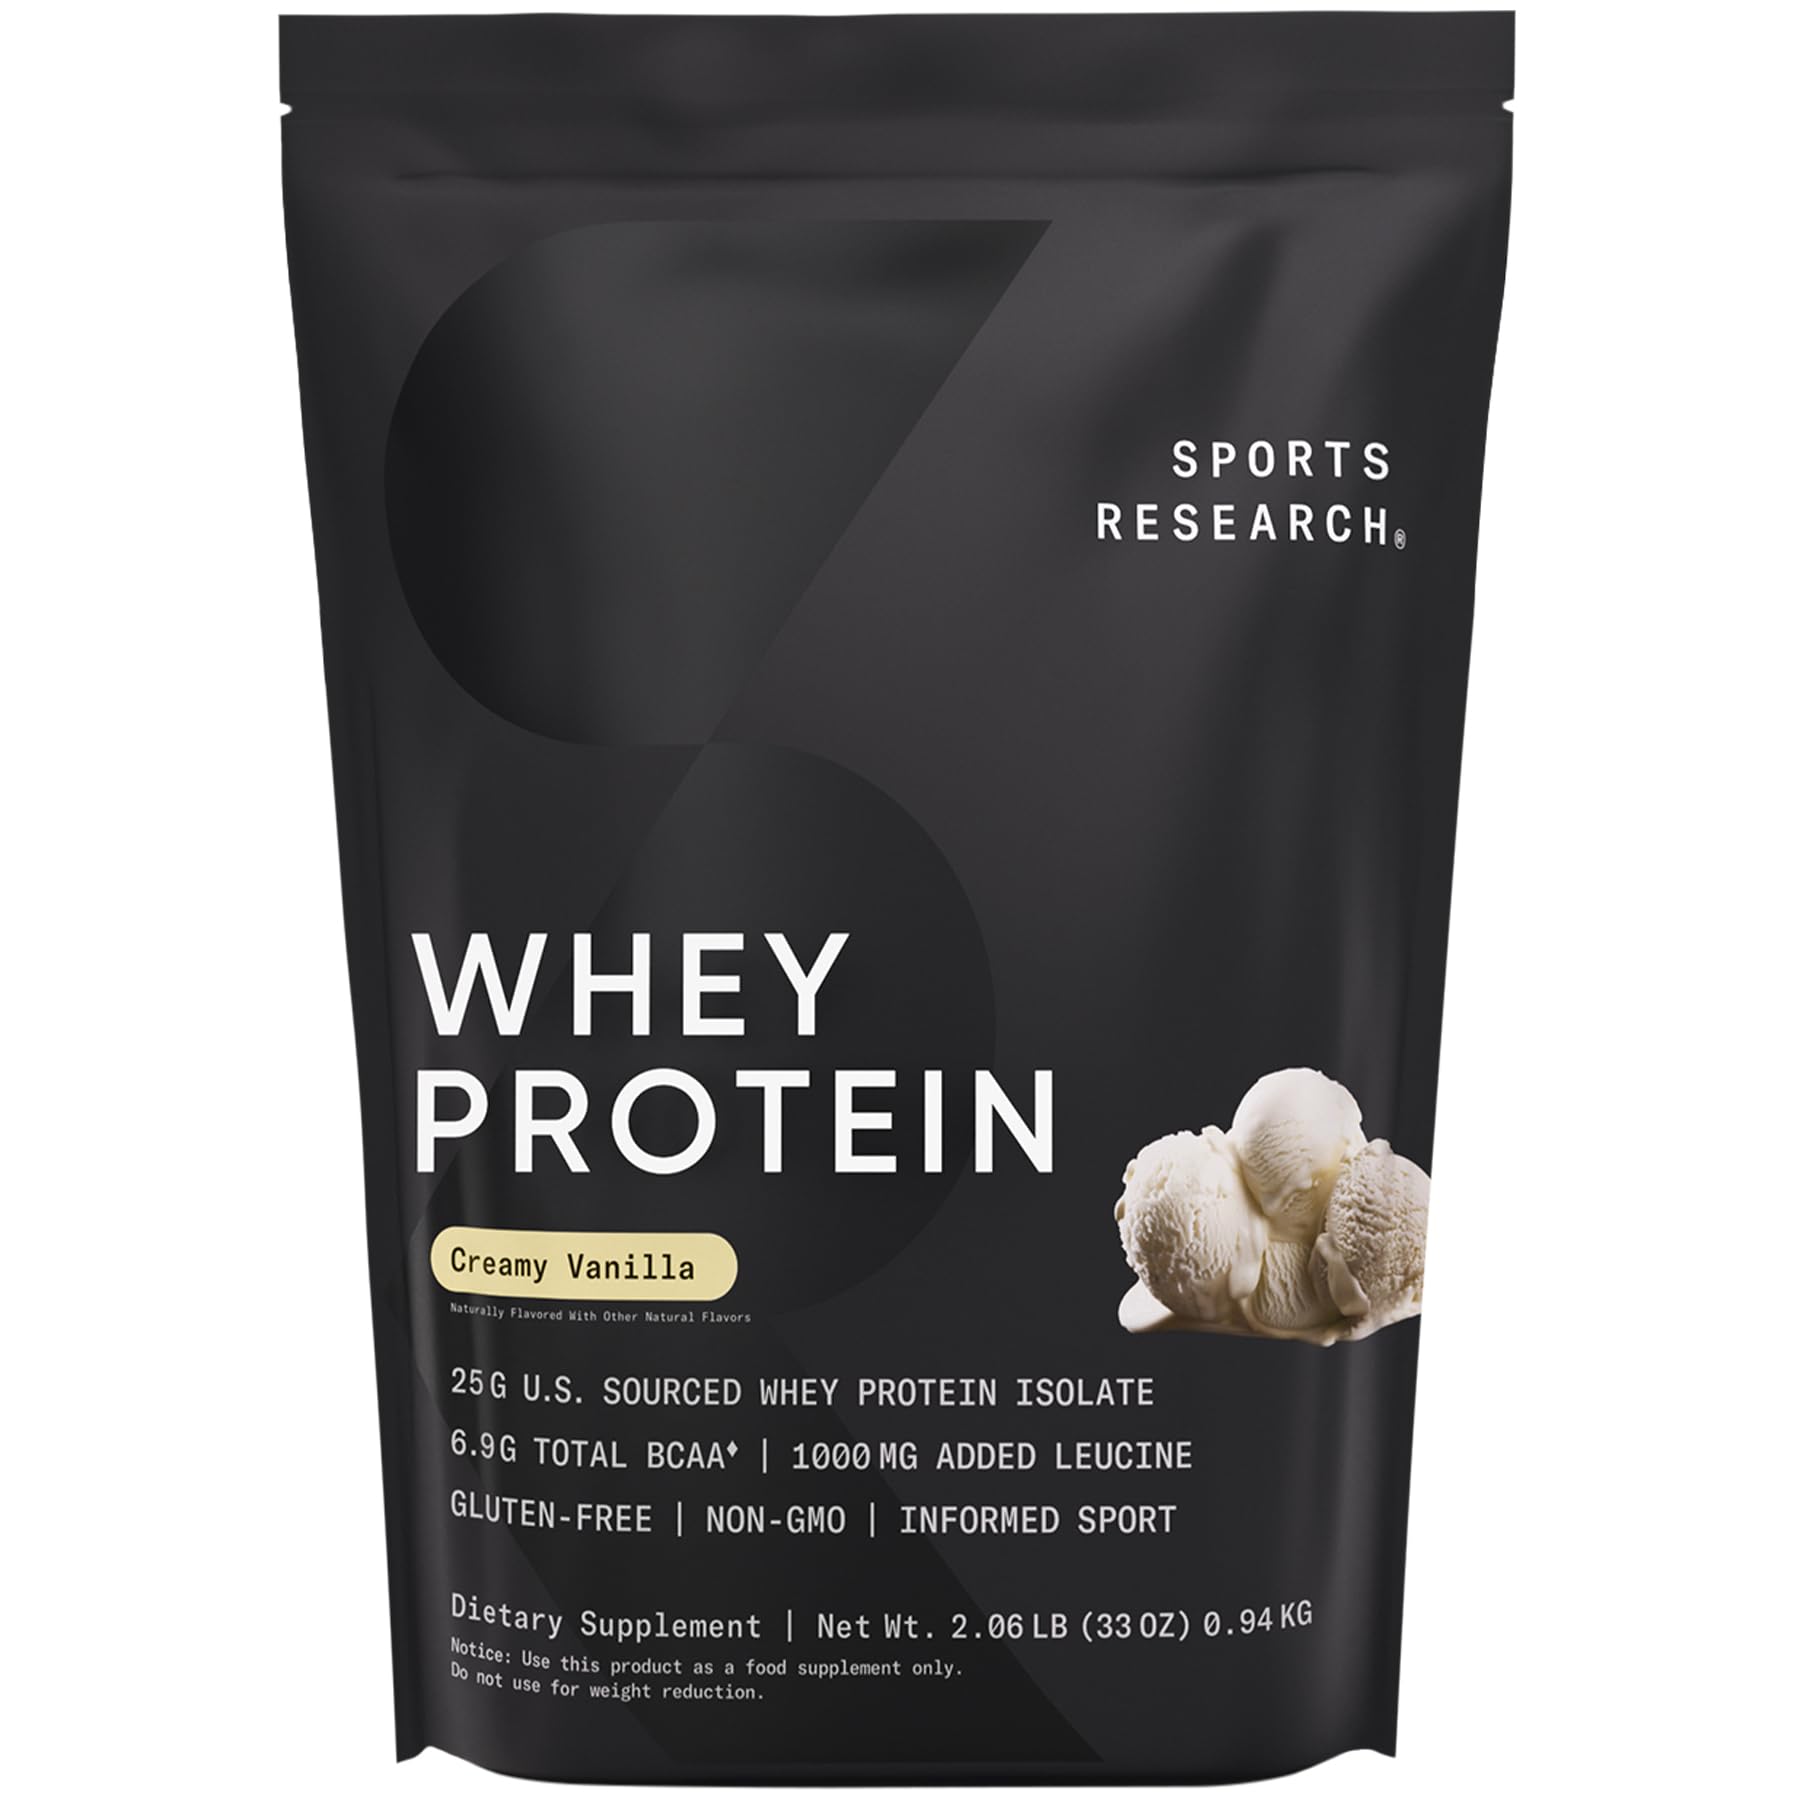 Sports Research Whey Protein Isolate - Sports Nutrition Protein Powder 25g per Serving - 2.1lb Bag Whey Protein - Vanilla Flavor - Bulk Protein Powder, 26 Servings